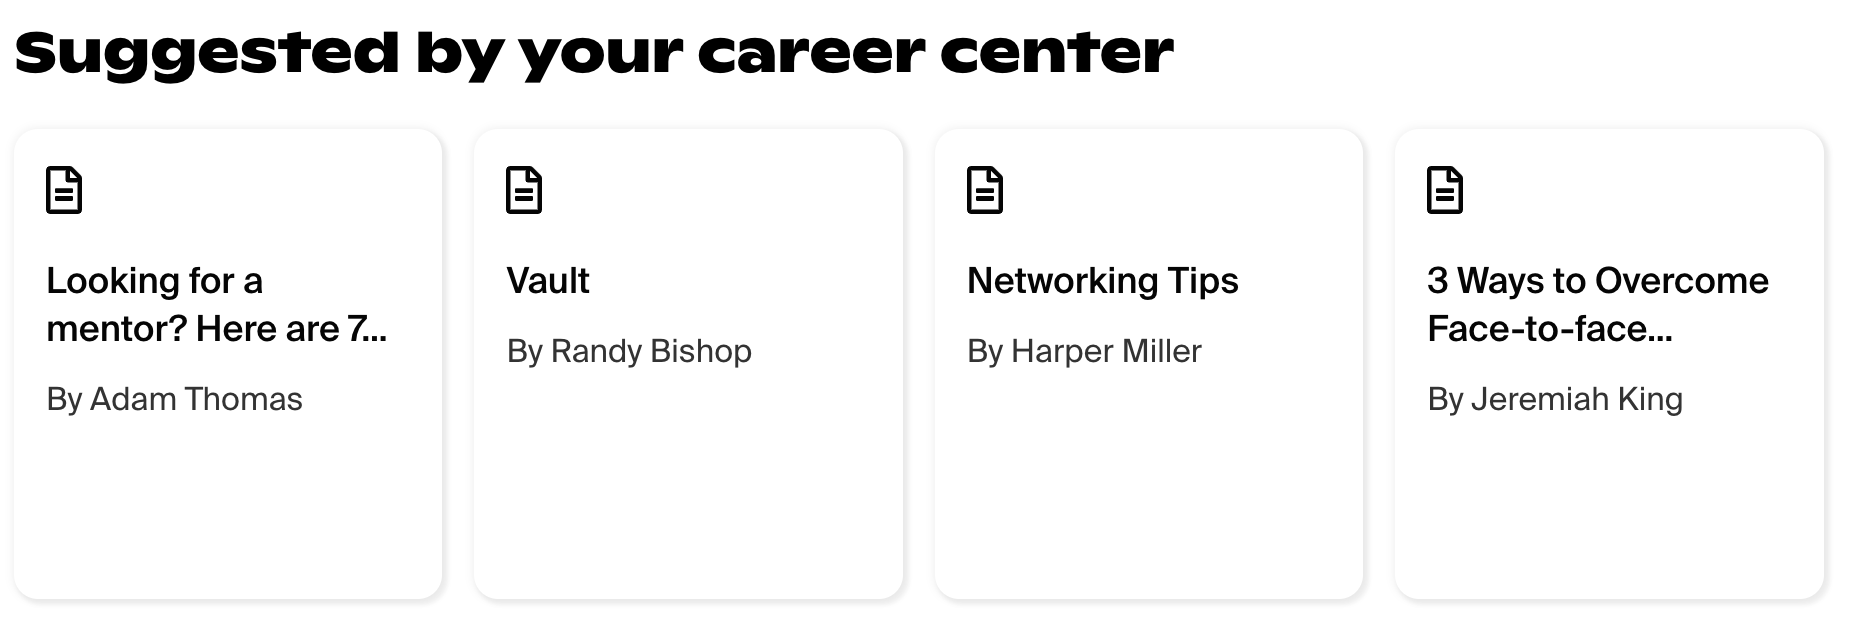 Suggested by your career center resources.png